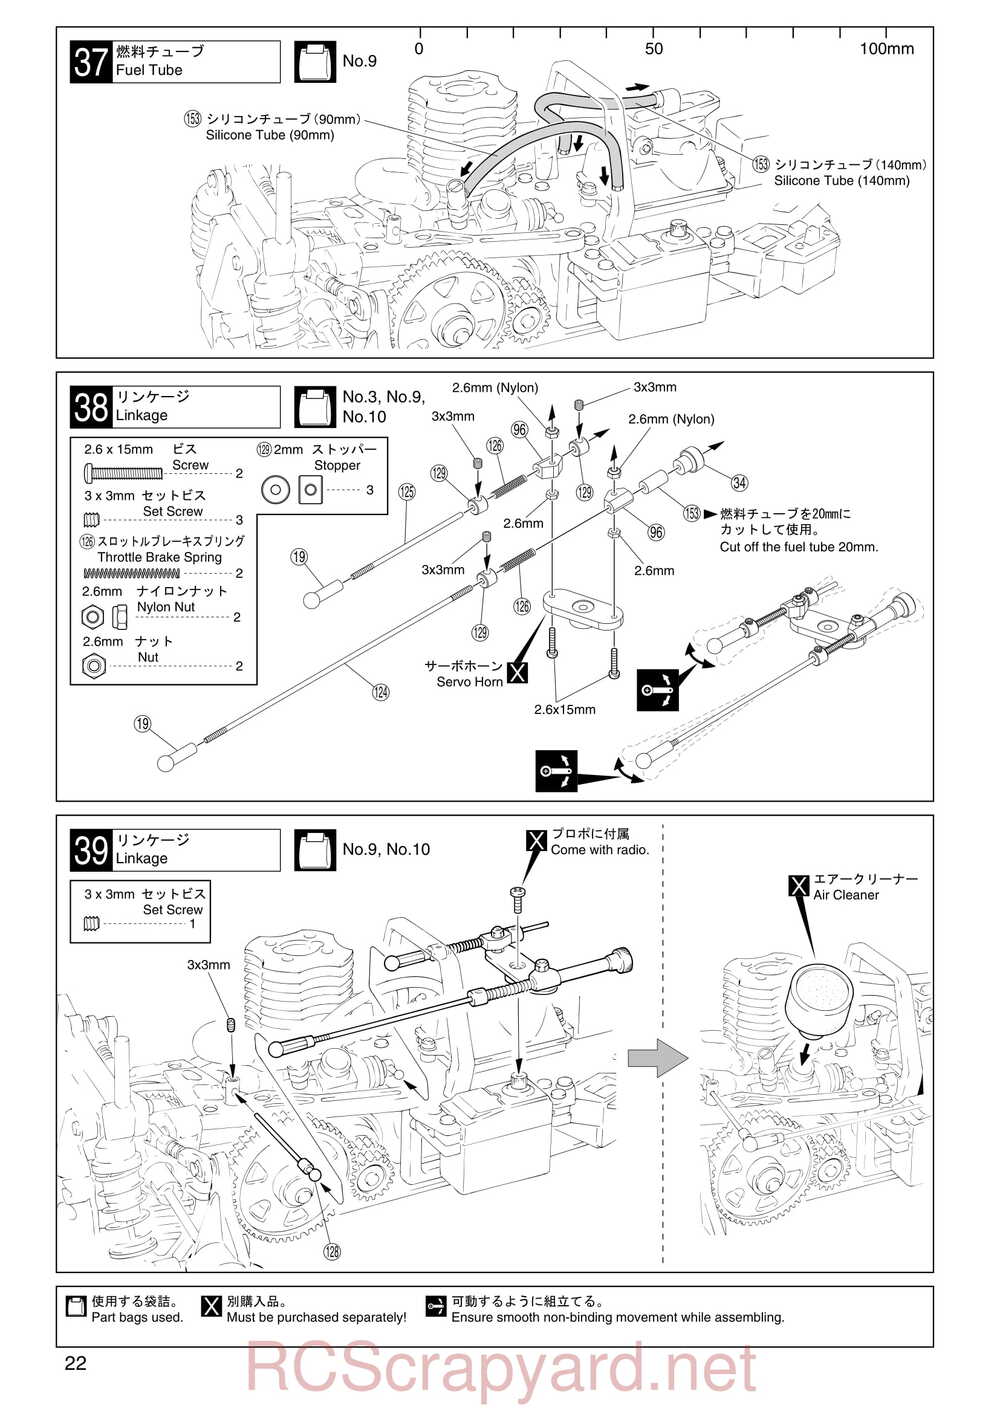 Kyosho - 31011 - V-One R - Manual - Page 22